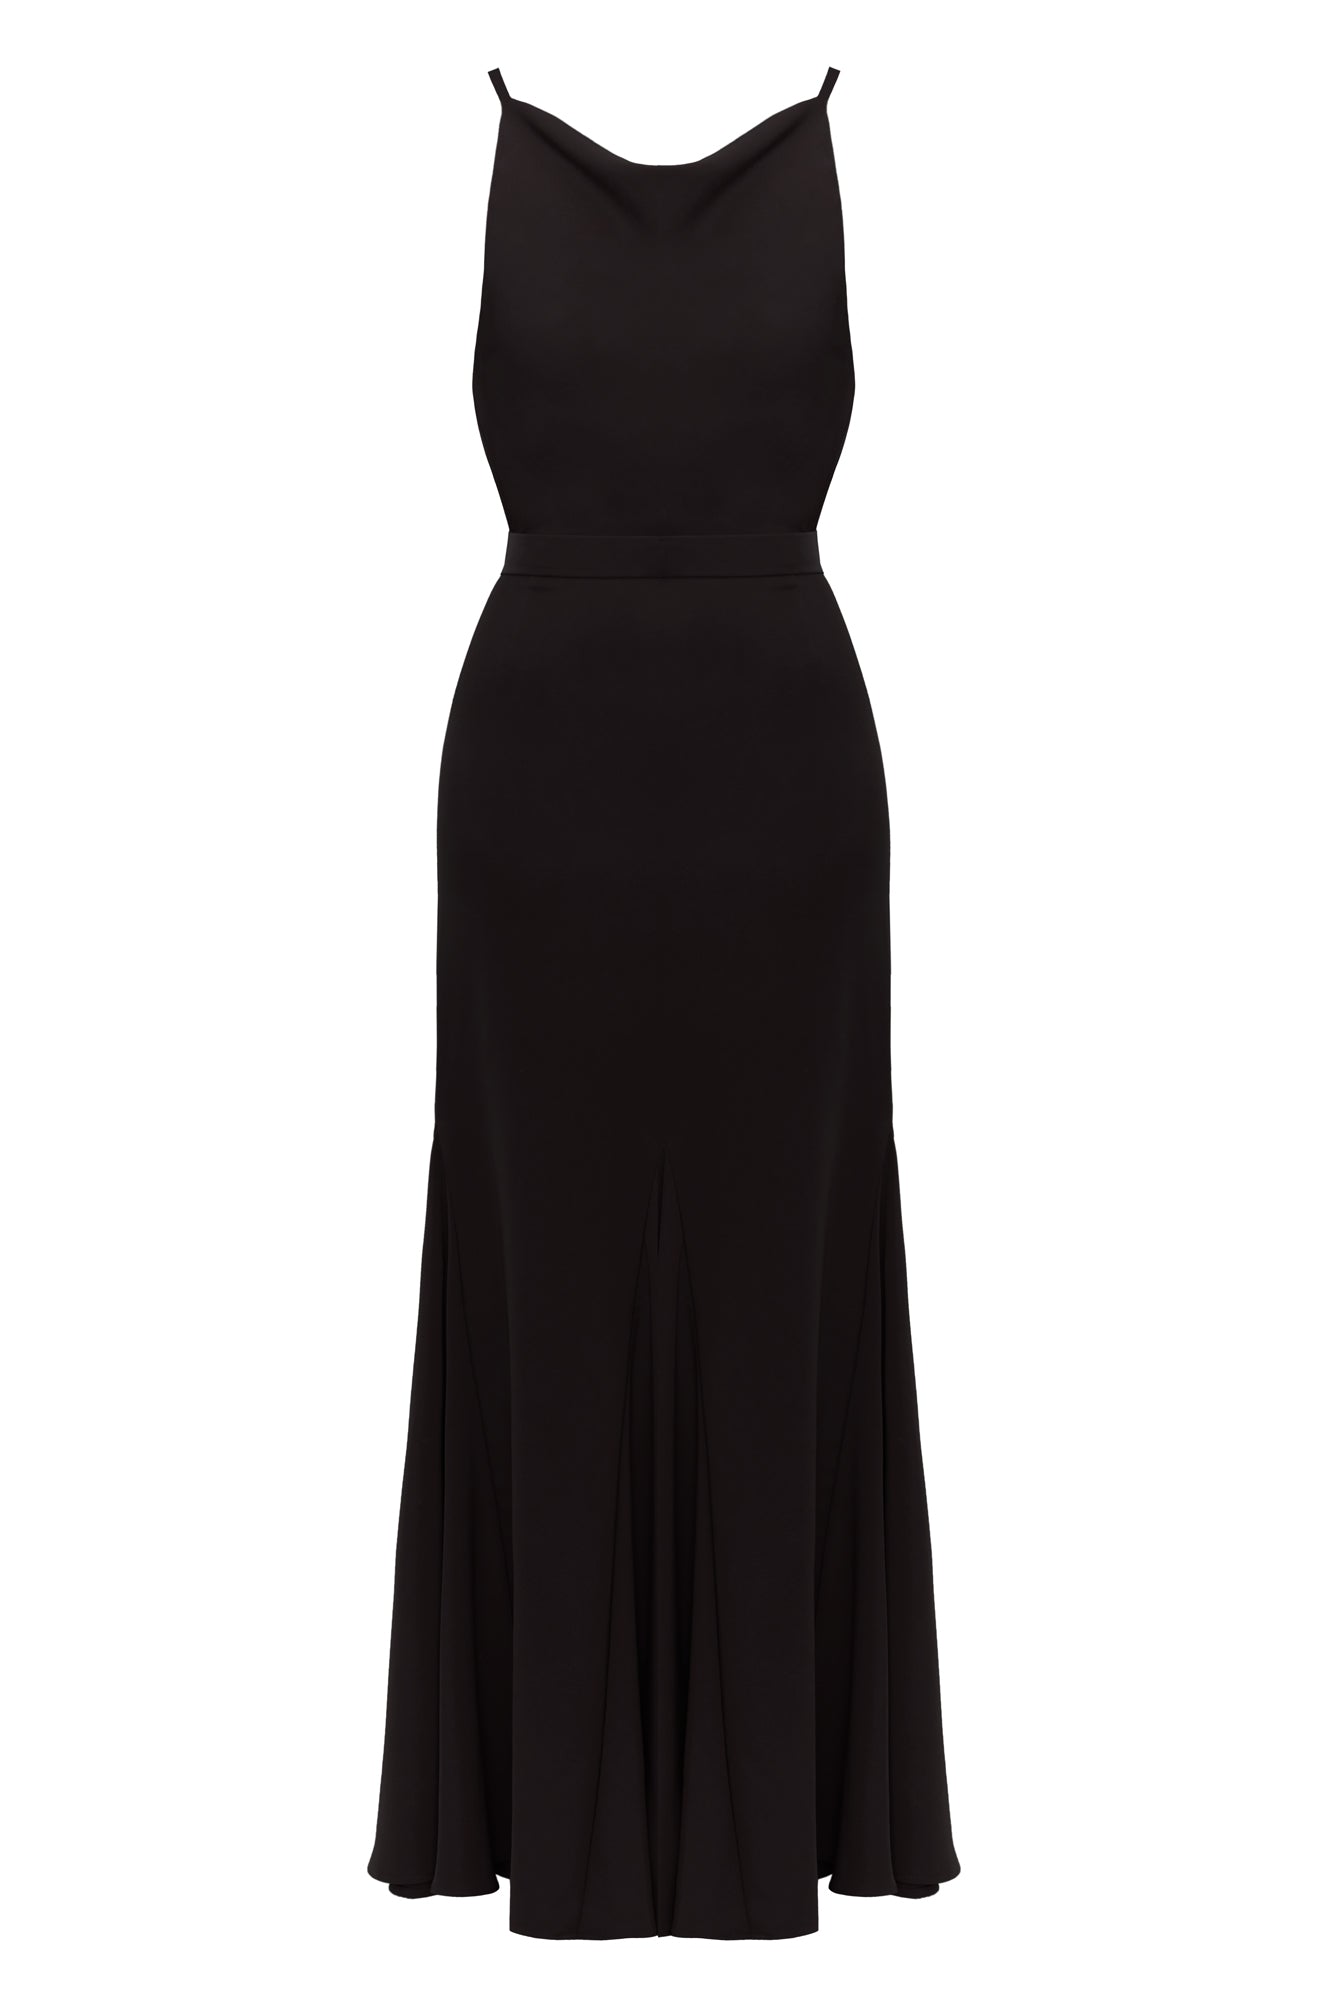 LINEA black evening gown with flattering skirt